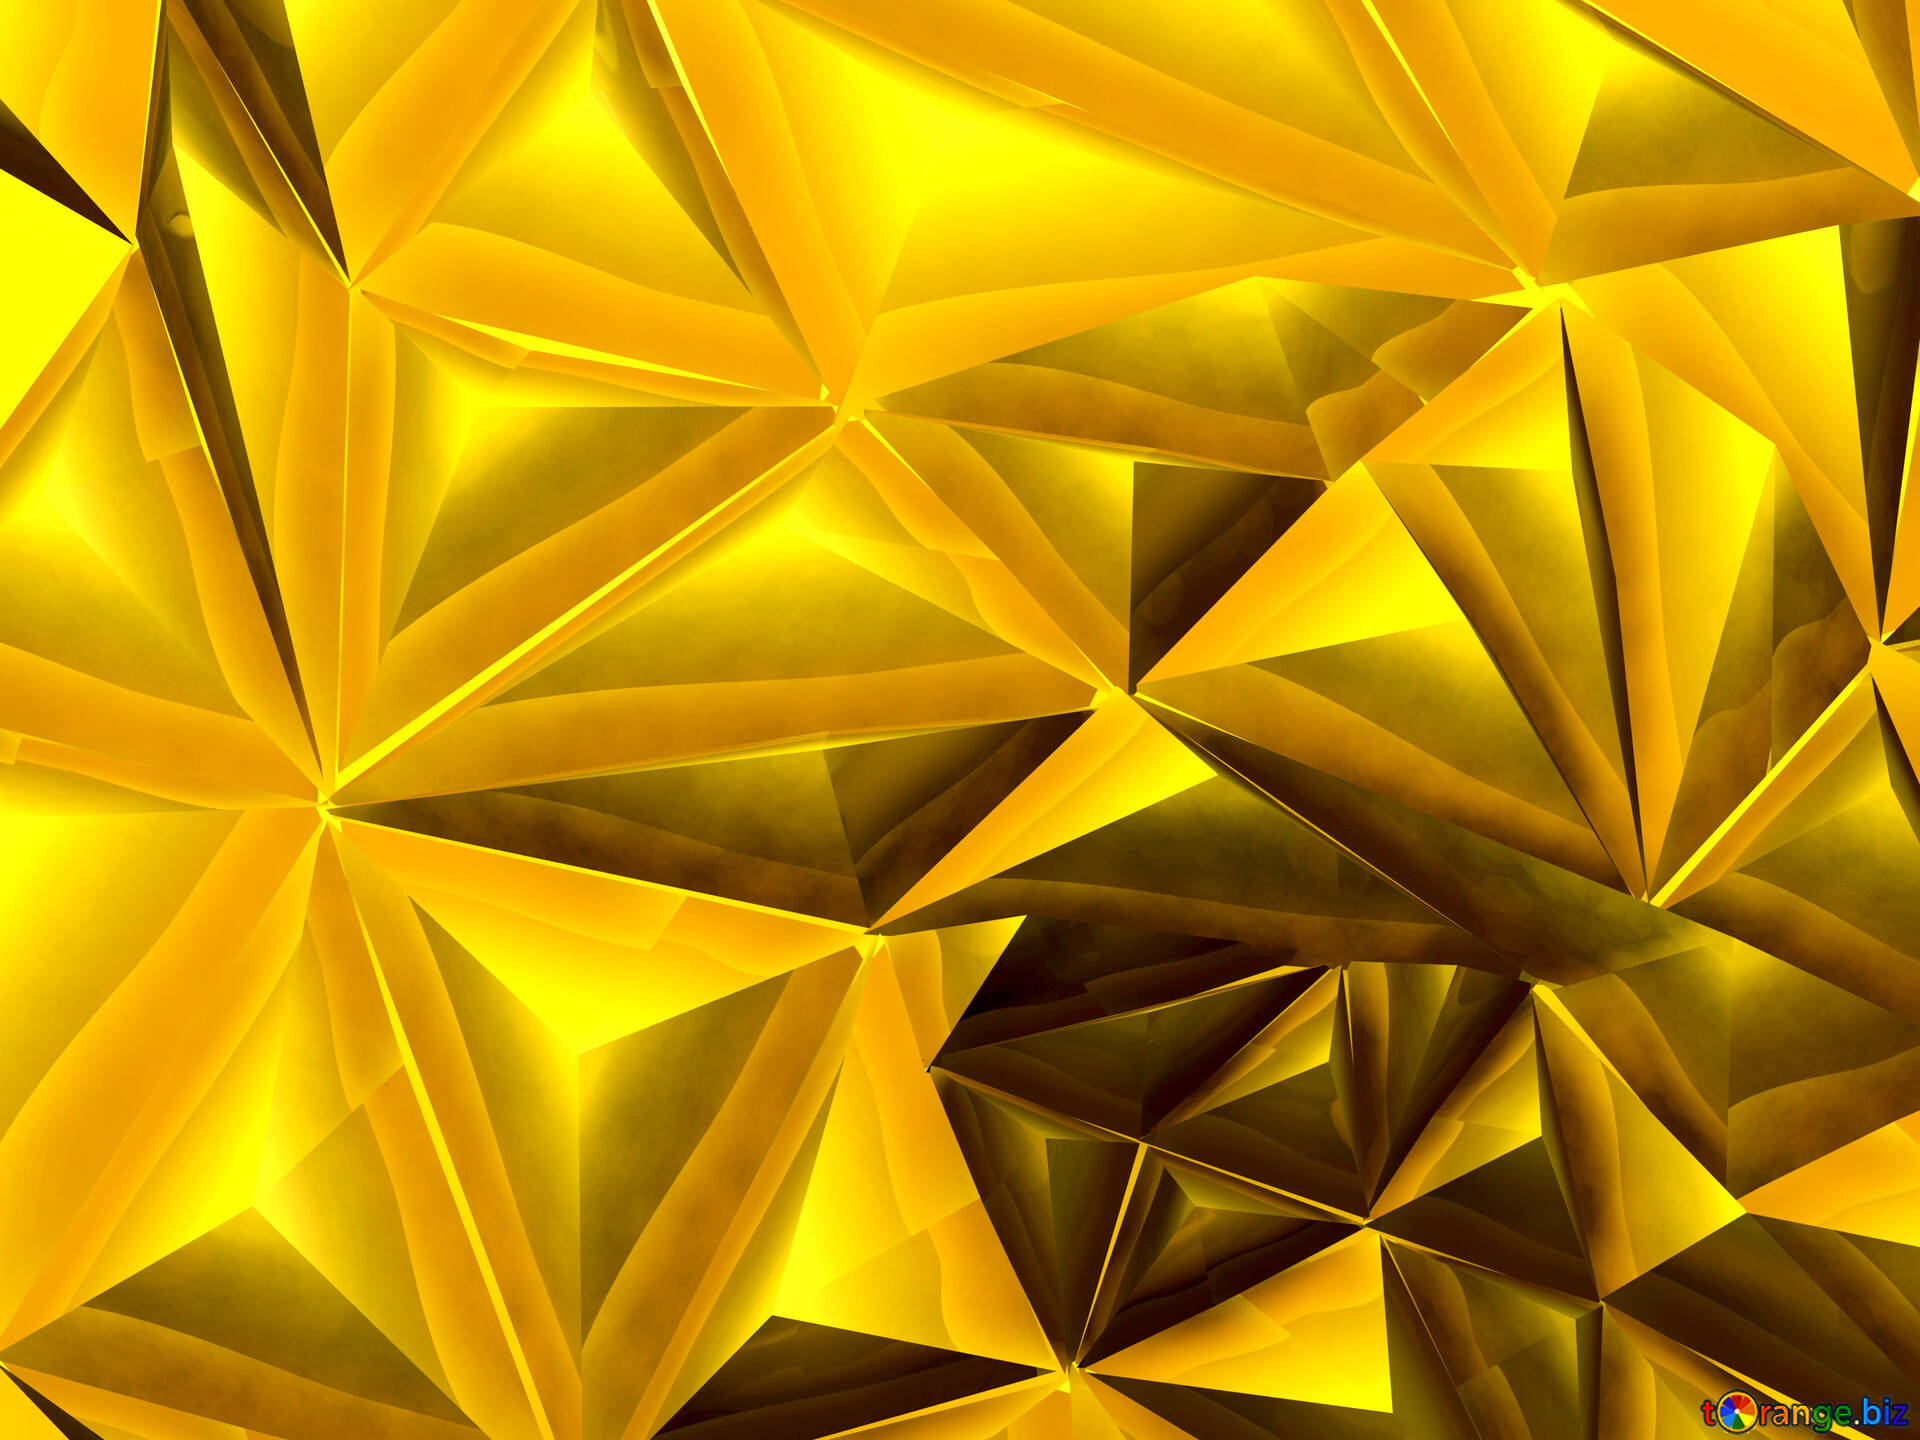 Textures patterns image polygon gold background images clipart № 51586 |   ~ free pics on cc-by license